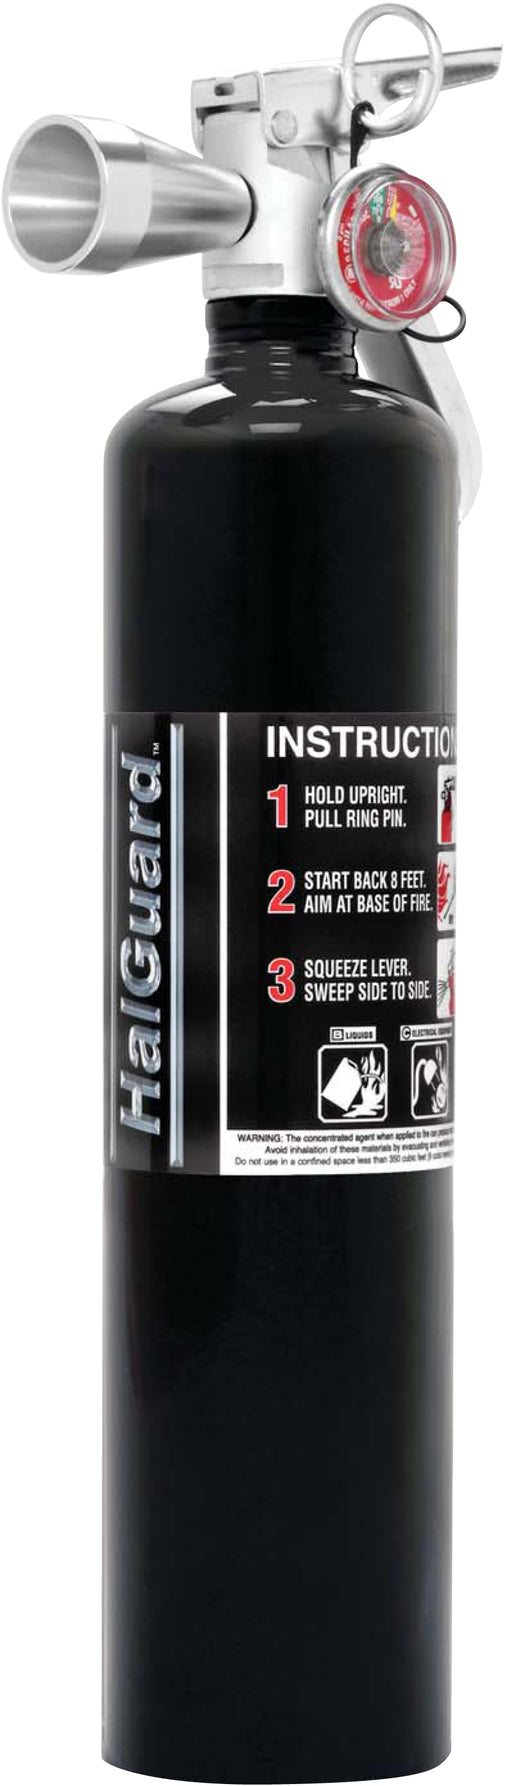 H3R Performance HalGuard (TM) Fire Extinguisher HG250B Extinguishing Agent - Liquefied Gas Clean Agent  Bottle Volume (LB) - 2.5 Pounds  Color - Black  Material - Steel  Includes Mounting Brackets - Yes  USCG Approved - No